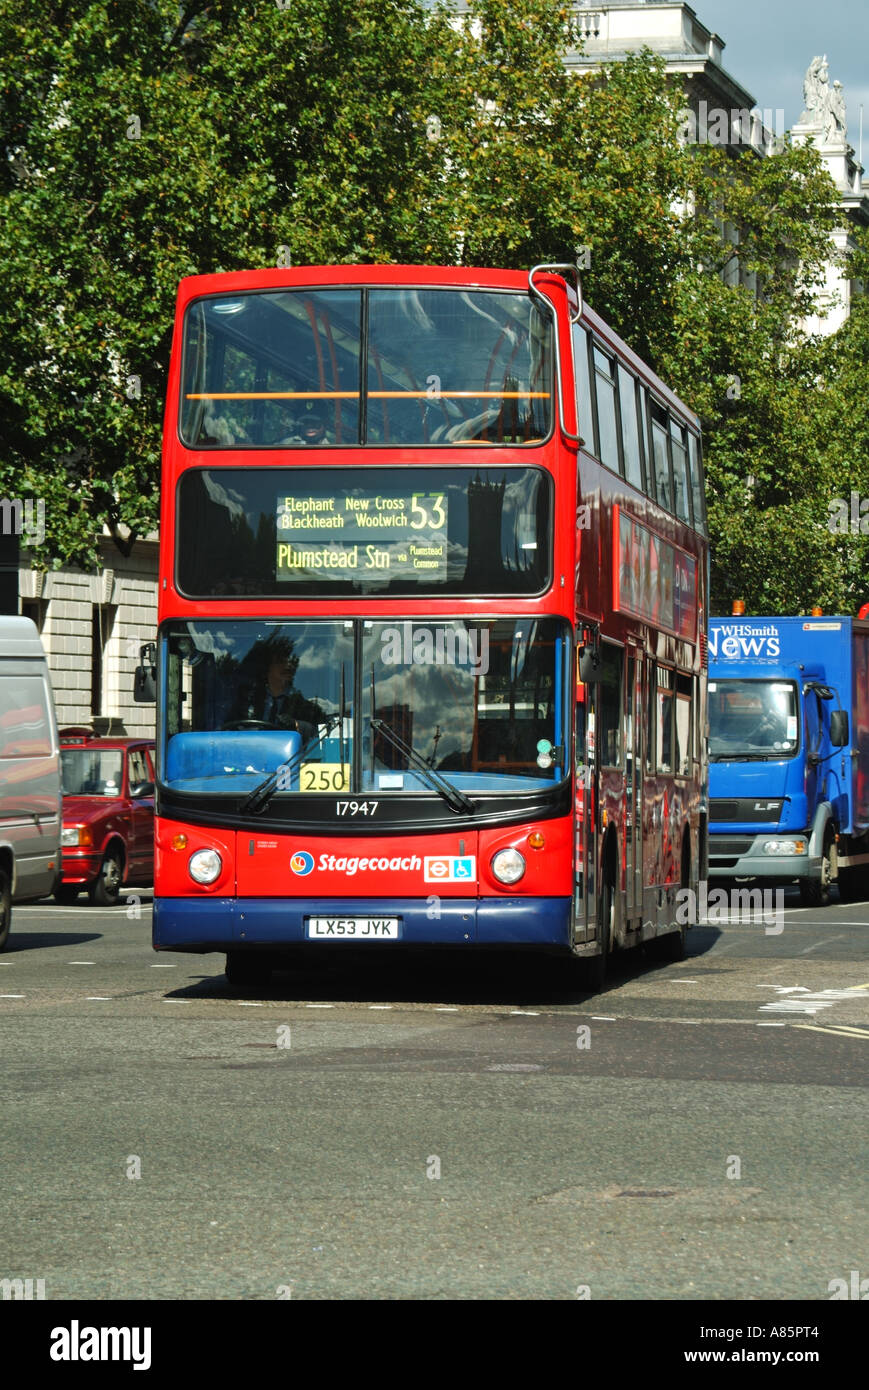 Front view red double decker Transport for London tfl Stagecoach public transport passenger bus company route 53 service & driver Whitehall England UK Stock Photo